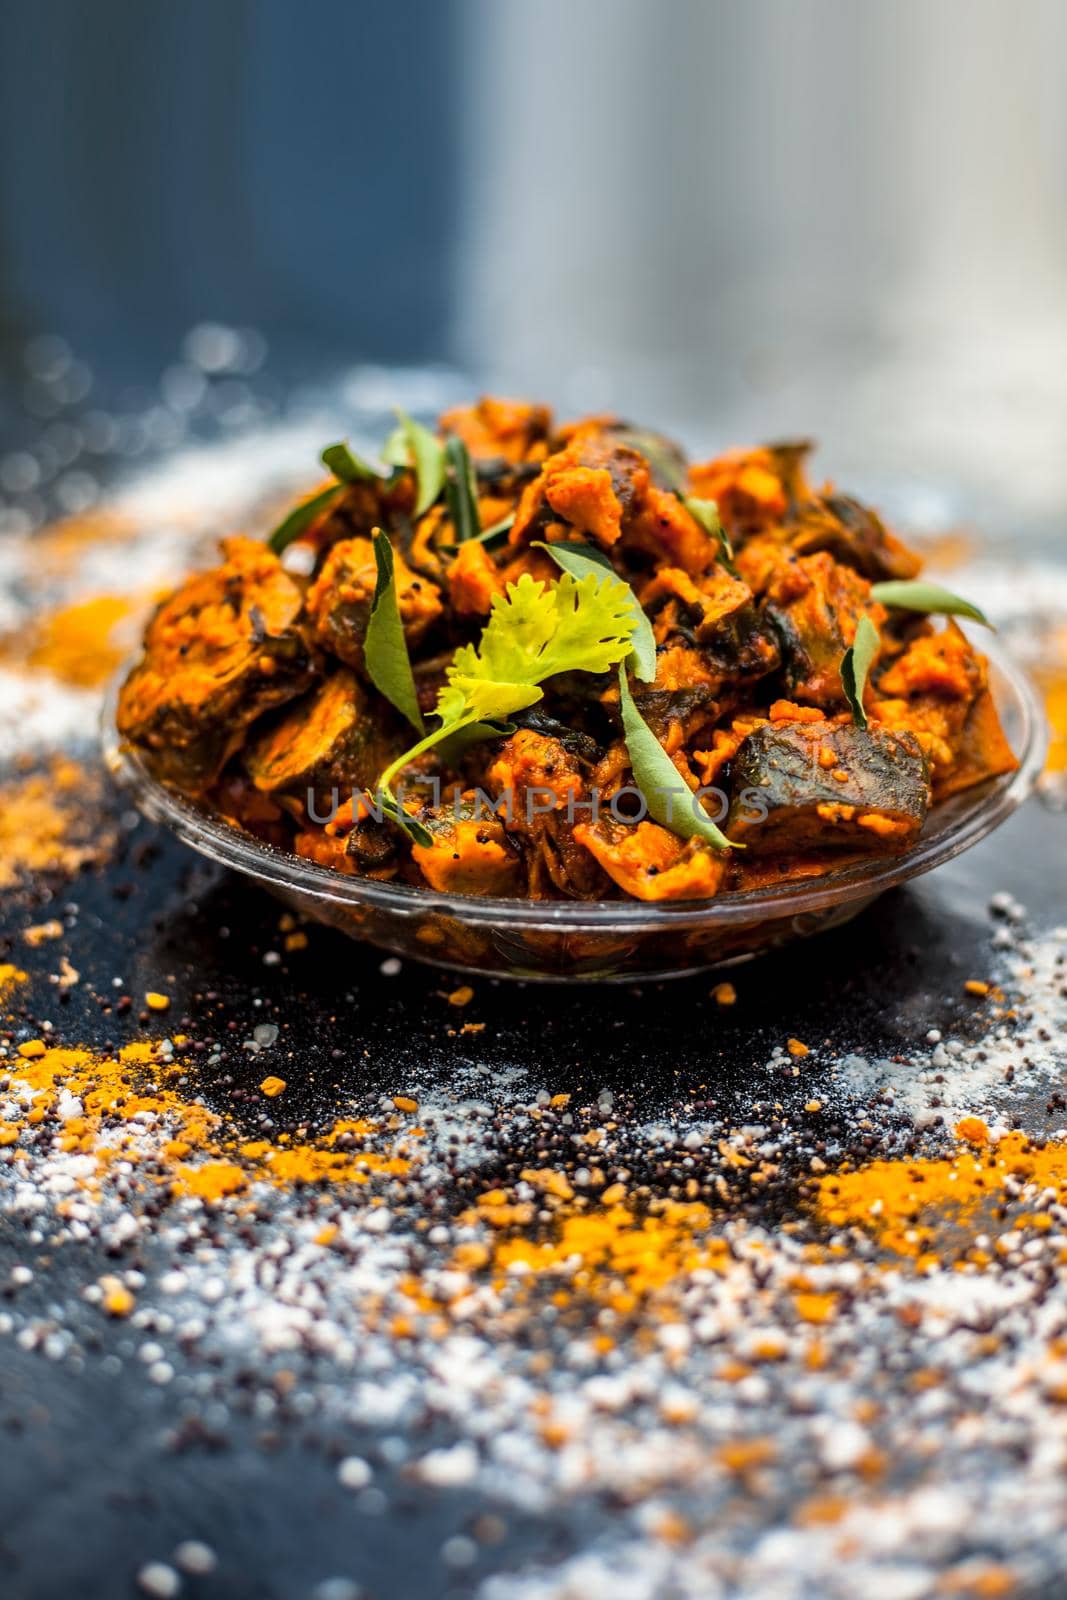 Famous Indian & Gujarati snack dish in a glass plate on wooden surface i.e. Patra or paatra consisting of mainly Colocasia esculenta or arbi ke pan or elephant ear leaves and spices. Vertical shot.